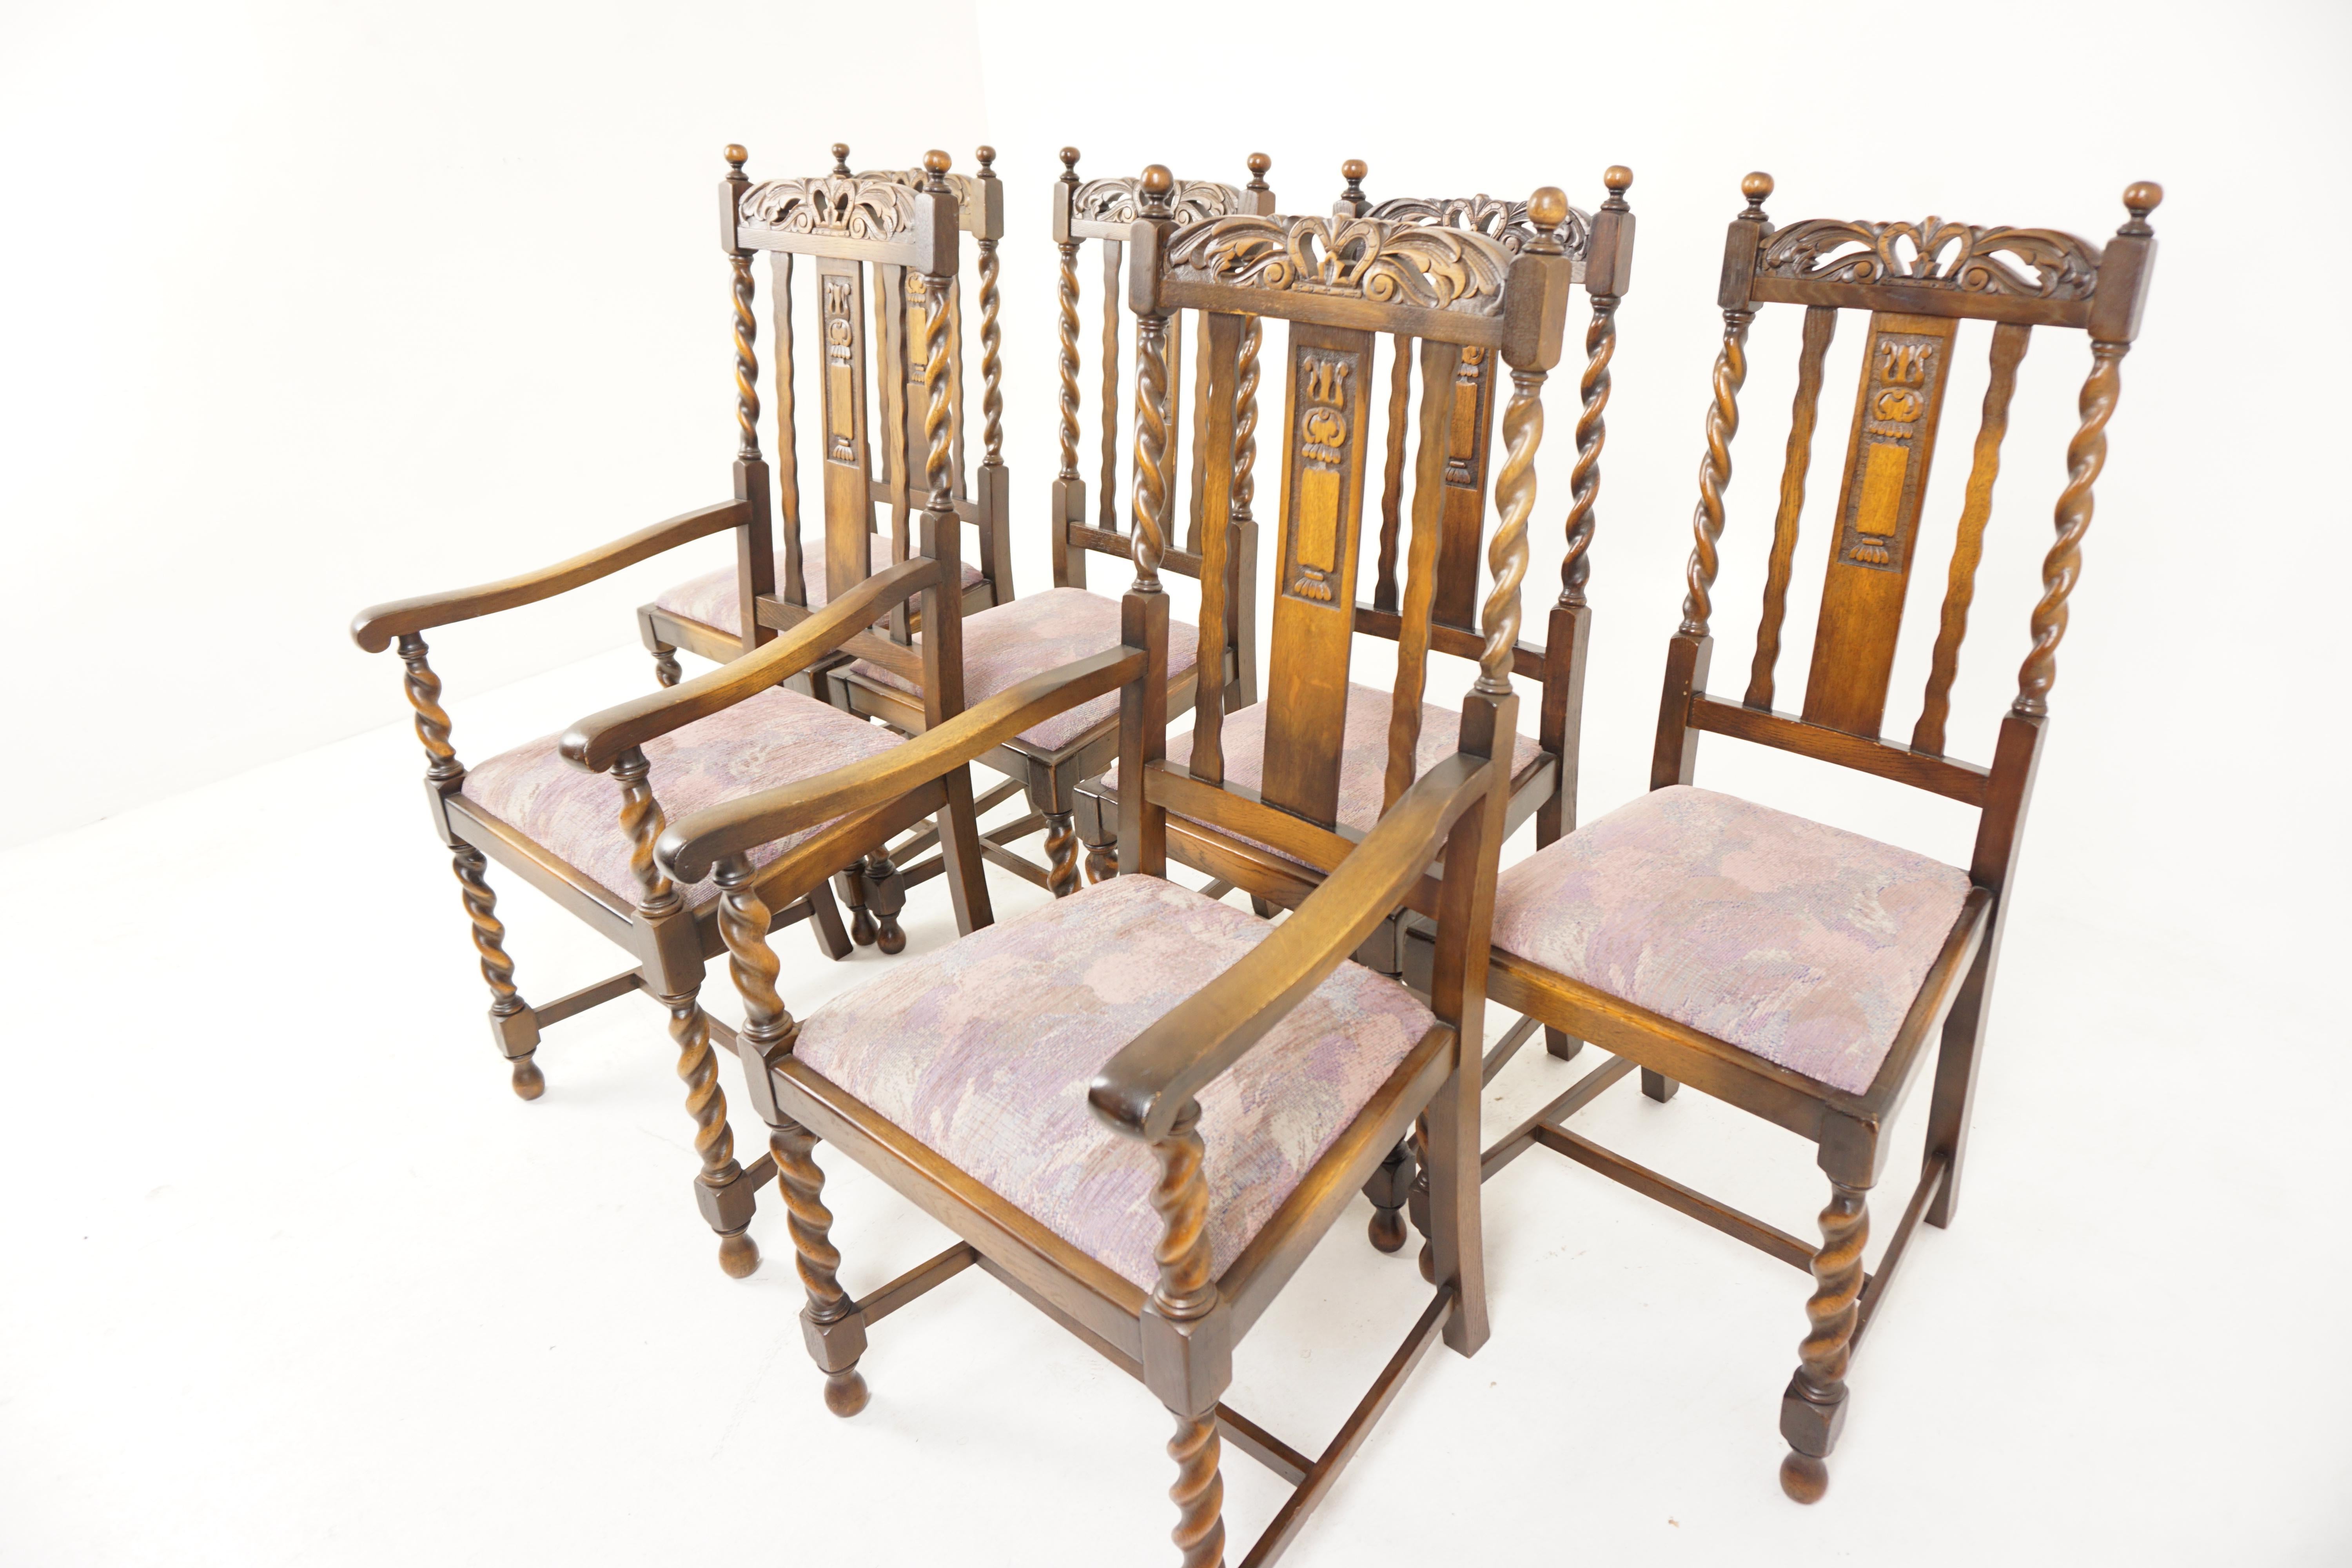 Antique barley twist cared oak dining chairs 4+2, Scotland 1920, B2920

Scotland 1920 
Solid oak 
Original finish
Carved top rail
Pair of barley twist supports with finials to the top
Carved vertical slat to the back
Upholstered lift out